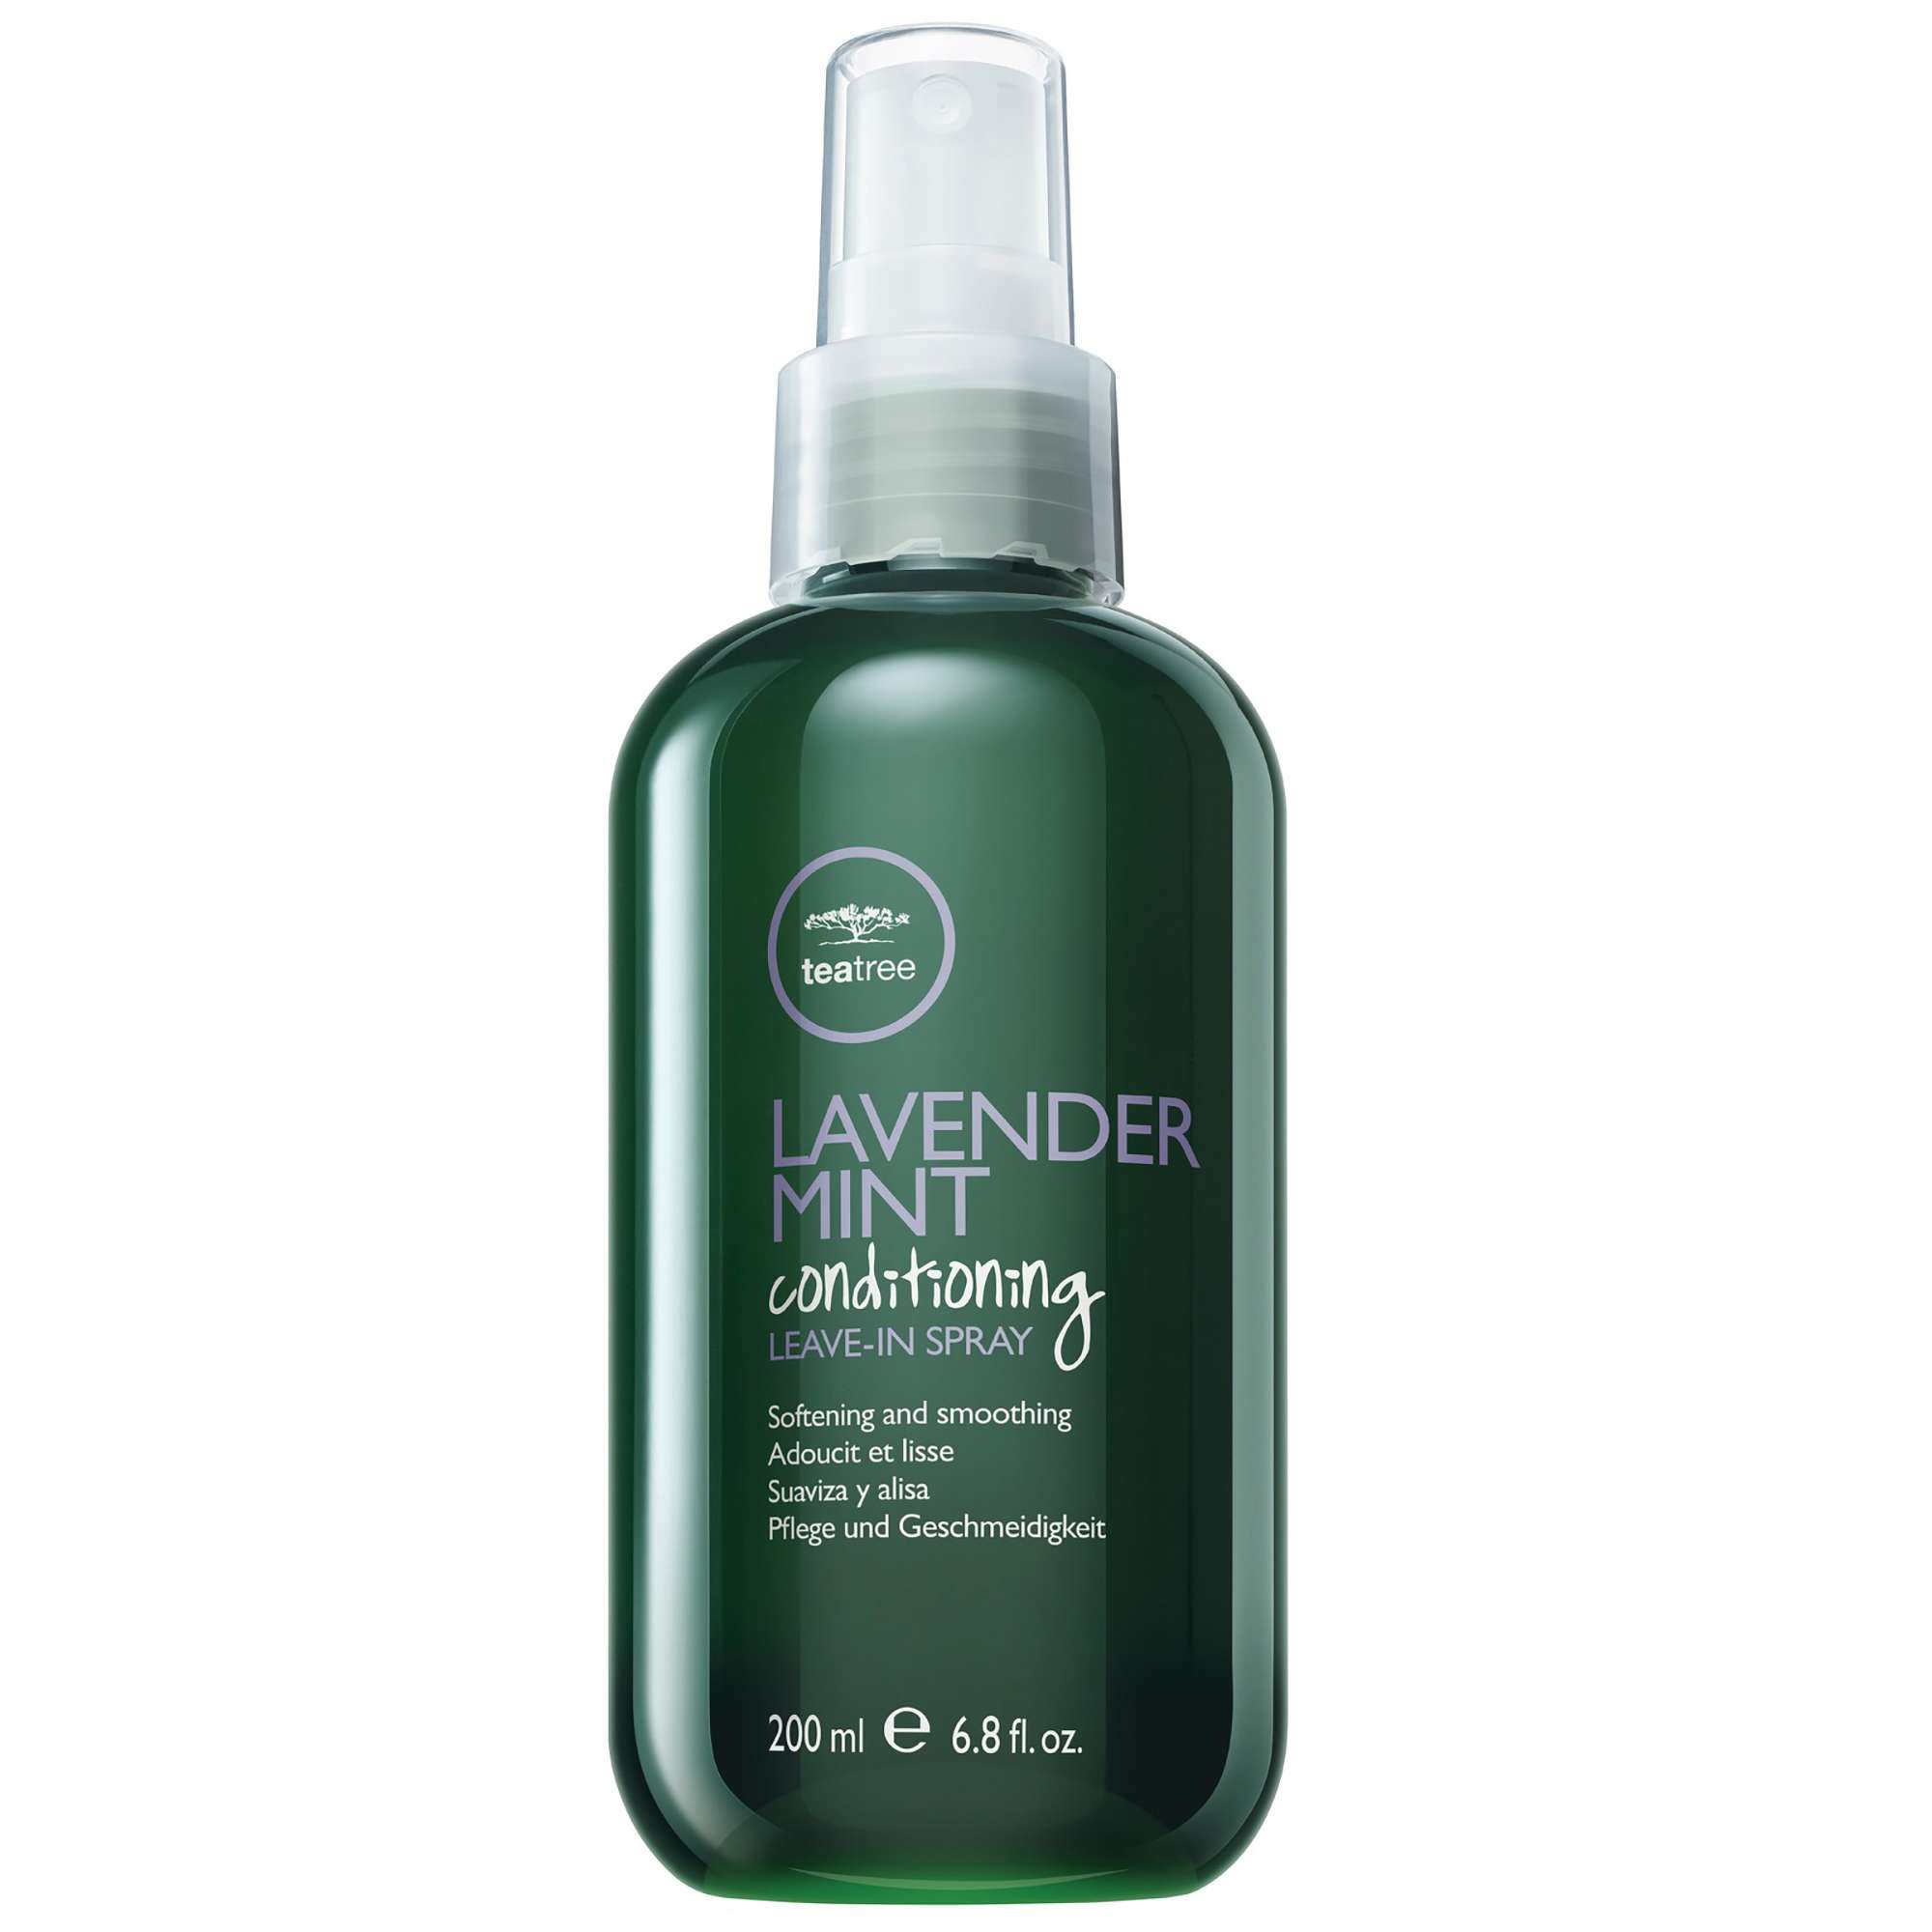 Image of Paul Mitchell Tea Tree Lavender Mint Conditioning Leave-In Spray 200ml